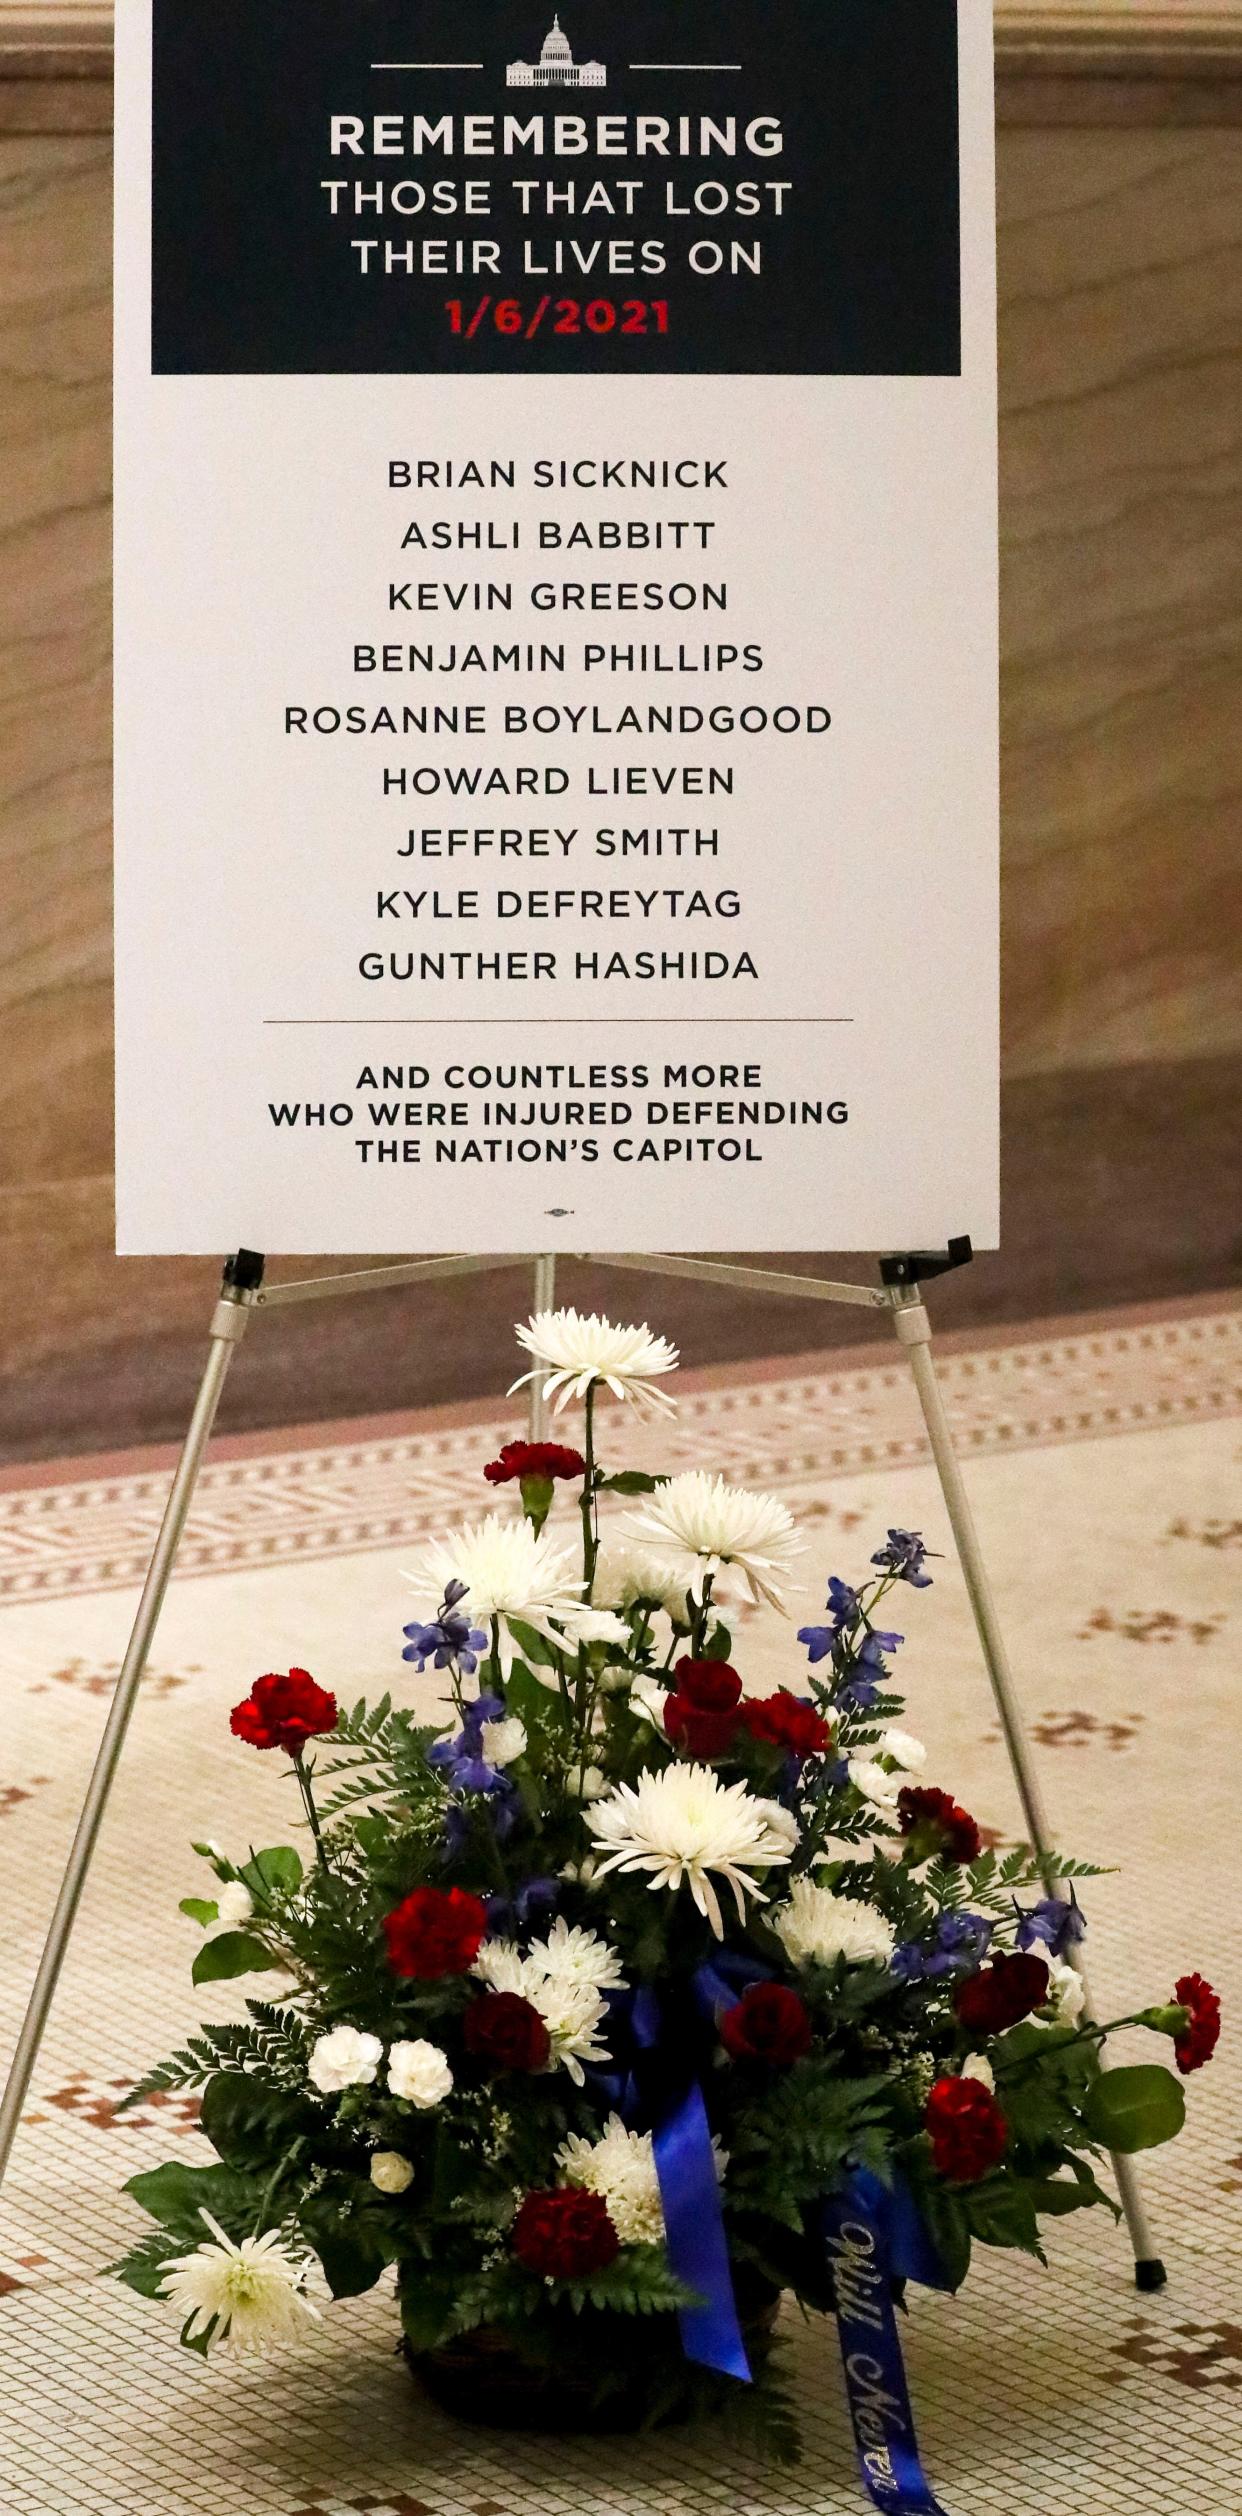 A poster is displayed in Milwaukee City Hall Rotunda commemorates those who died on the Jan. 6  insurrection and in the weeks and months after at the U.S. Capitol in Washington, D.C. This is the first anniversary of the insurrection.